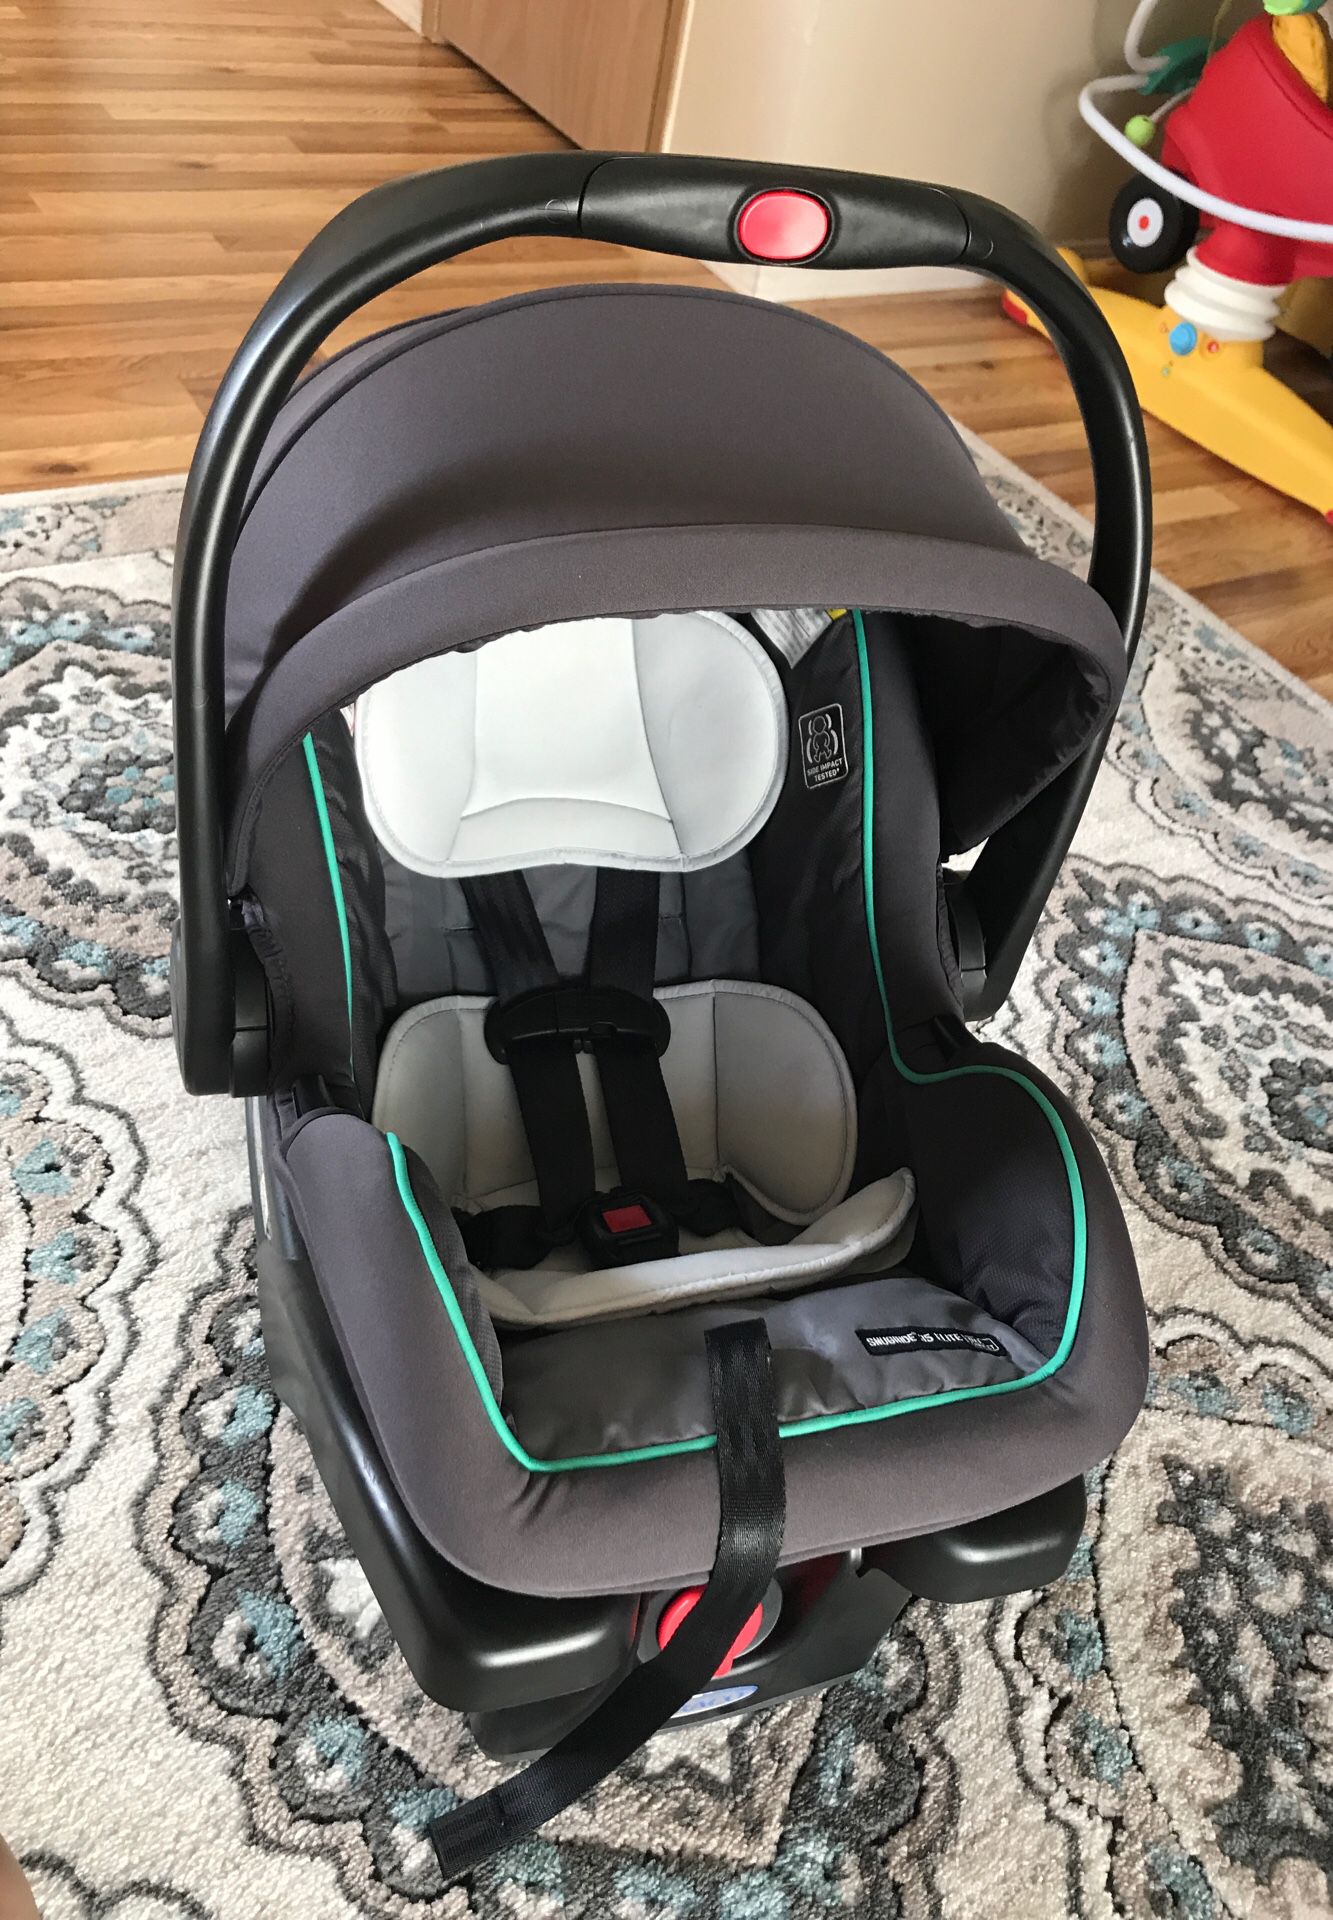 Graco click connect car seat and base